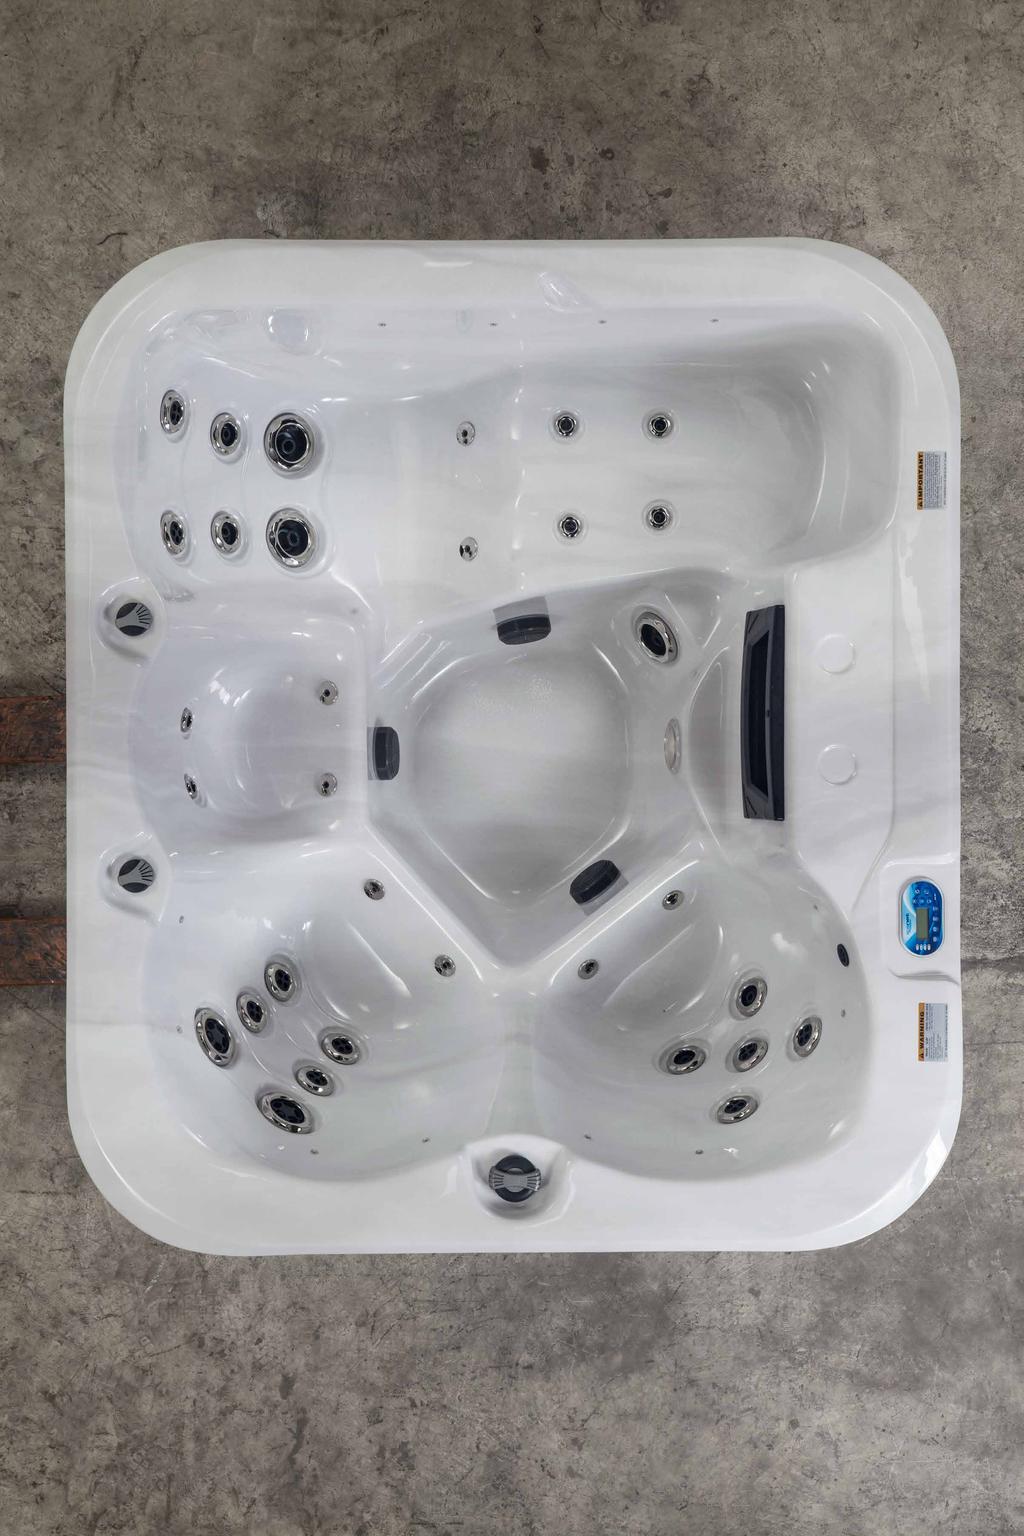 Getting to know your spa. Your new Arcadia portable spa has many features to help adjust and customize the water flow to your chosen configuration and enjoyment.